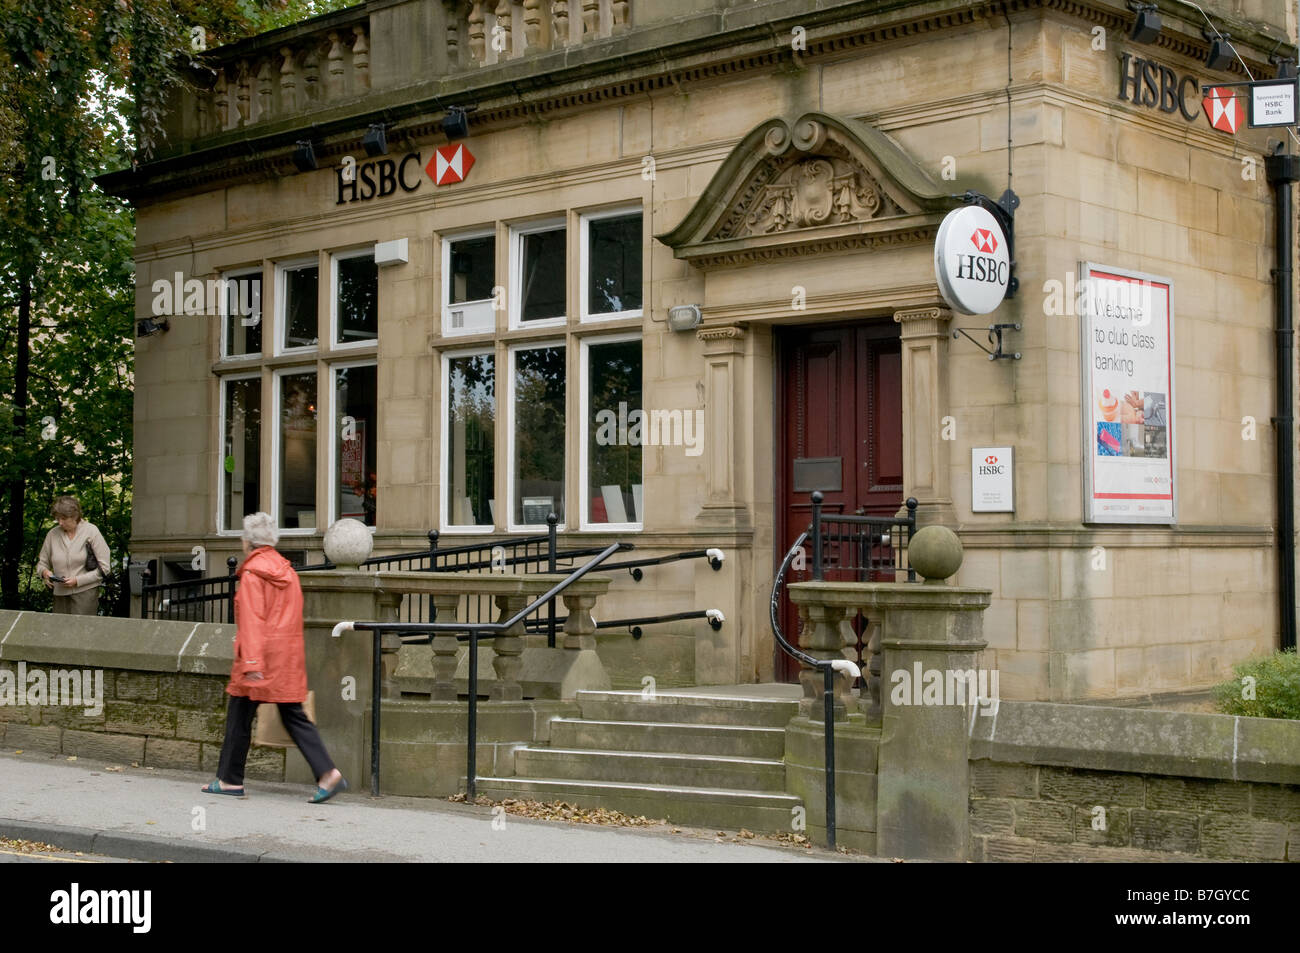 A high street branch of the HSBC bank. Stock Photo